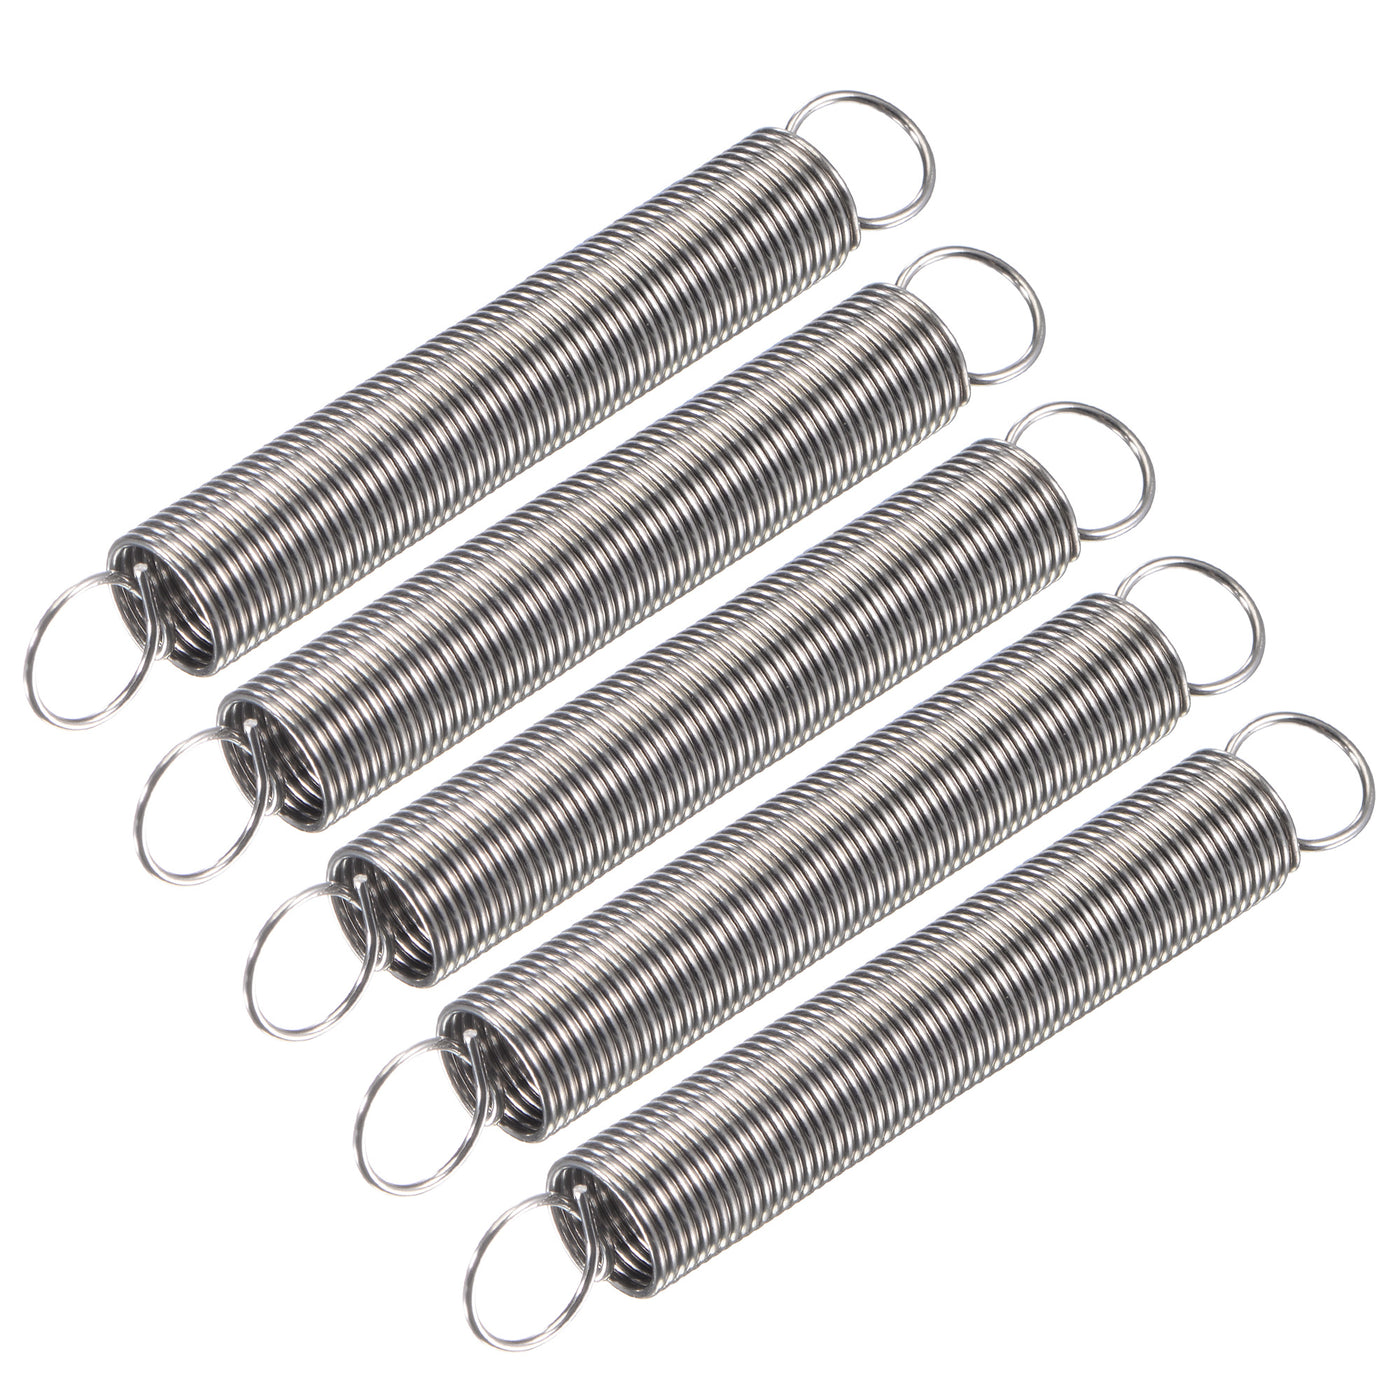 Uxcell Uxcell 1mmx12mmx70mm Extended Compression Spring,2.9Lbs Load Capacity,Silver,5pcs